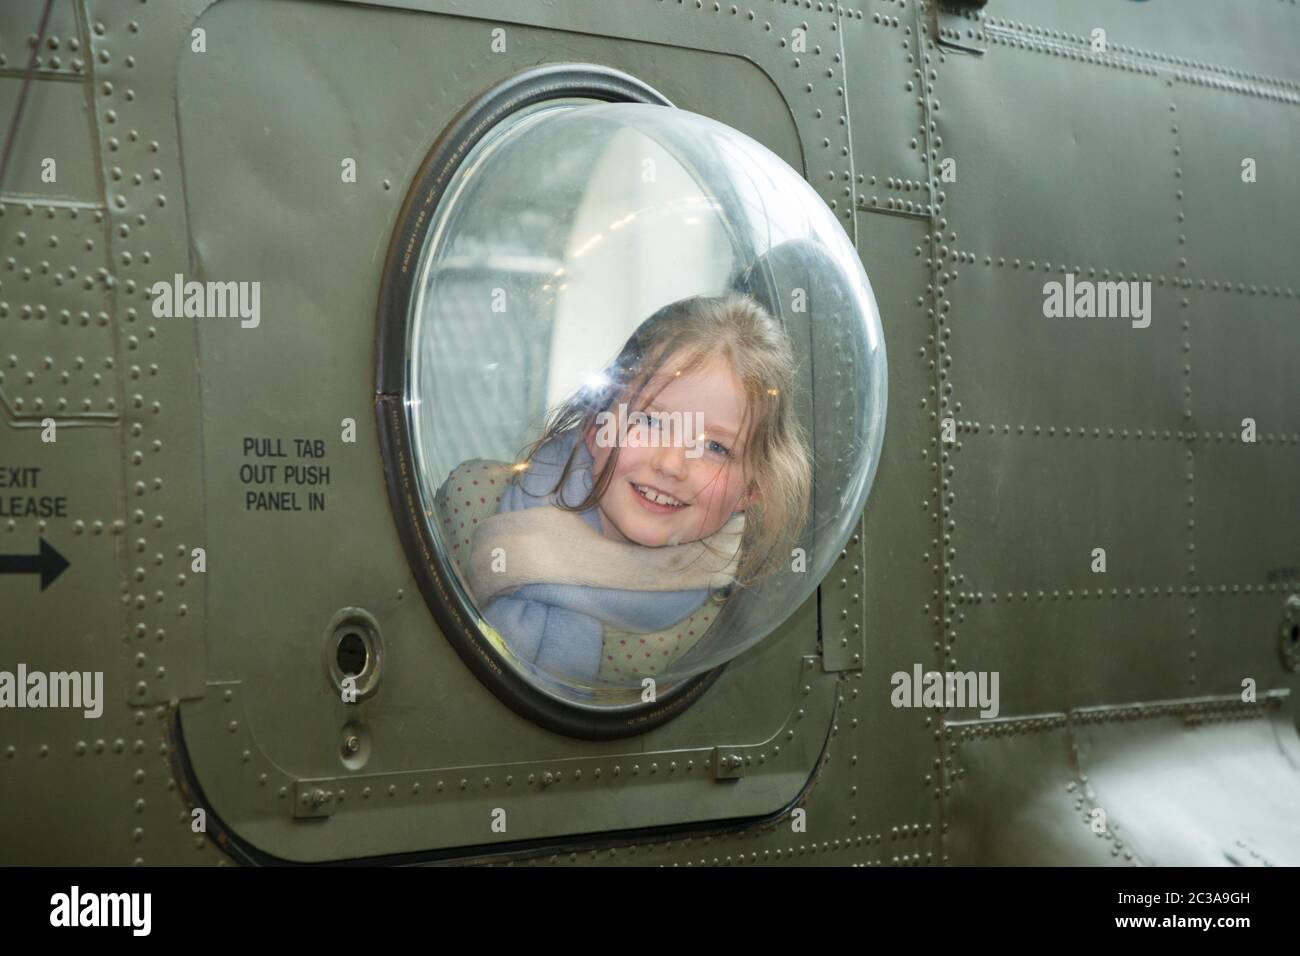 Visitor tourist / children / child / girl looks out of plexi glass bubble window of a Boeing Chinook HC2 helicopter, aircraft. RAF Royal air force museum, Hendon London UK (117) Stock Photo